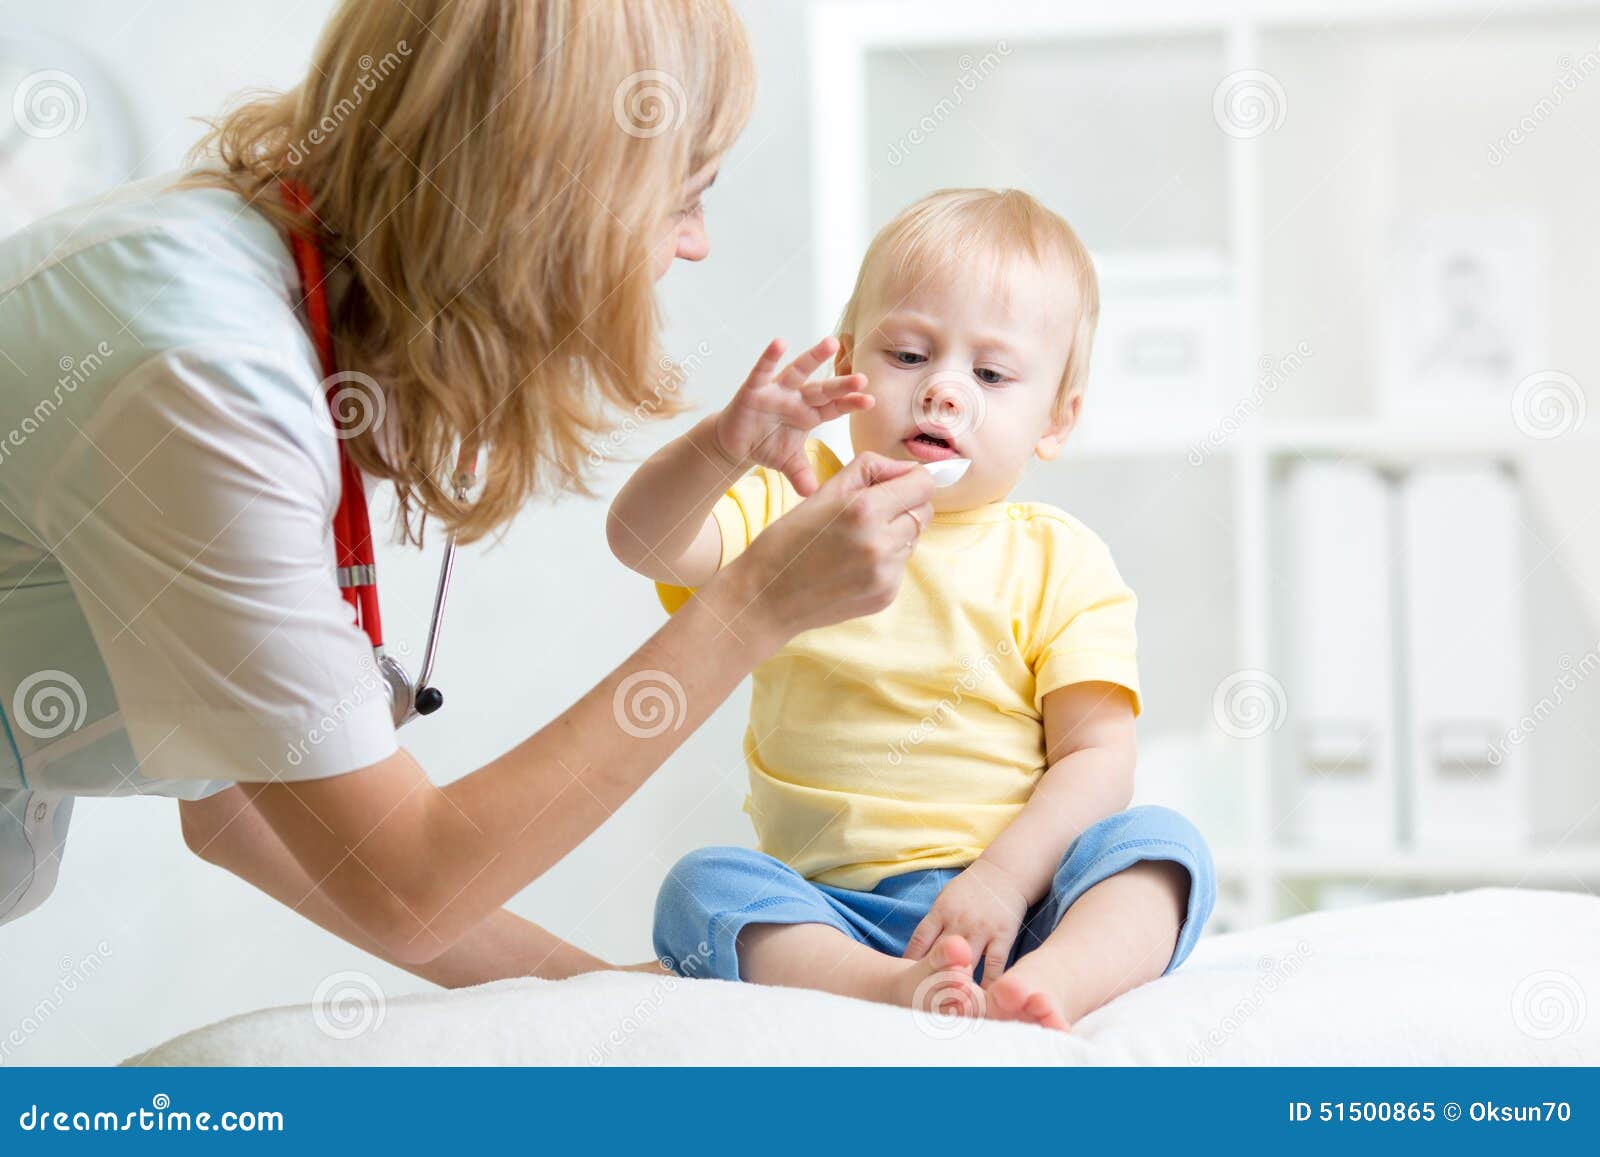 doctor giving medicament with a spoon